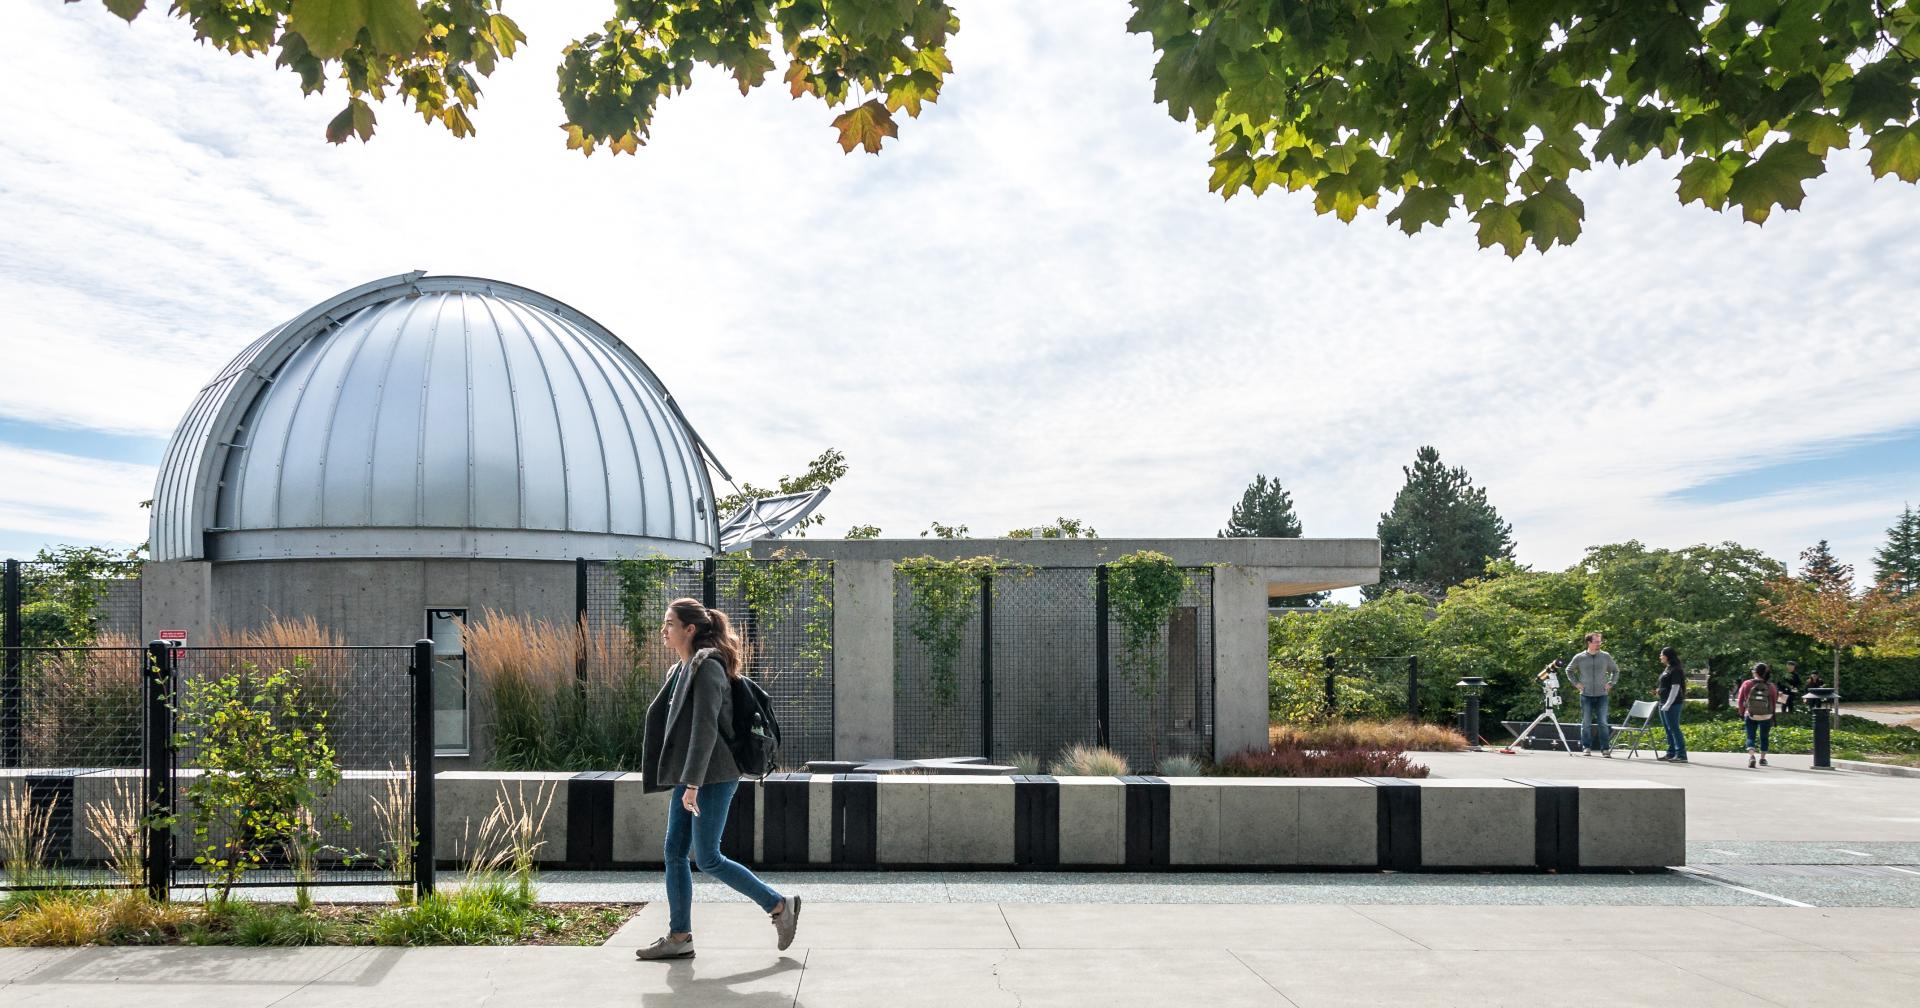 SFU Trottier Observatory and Science Courtyard